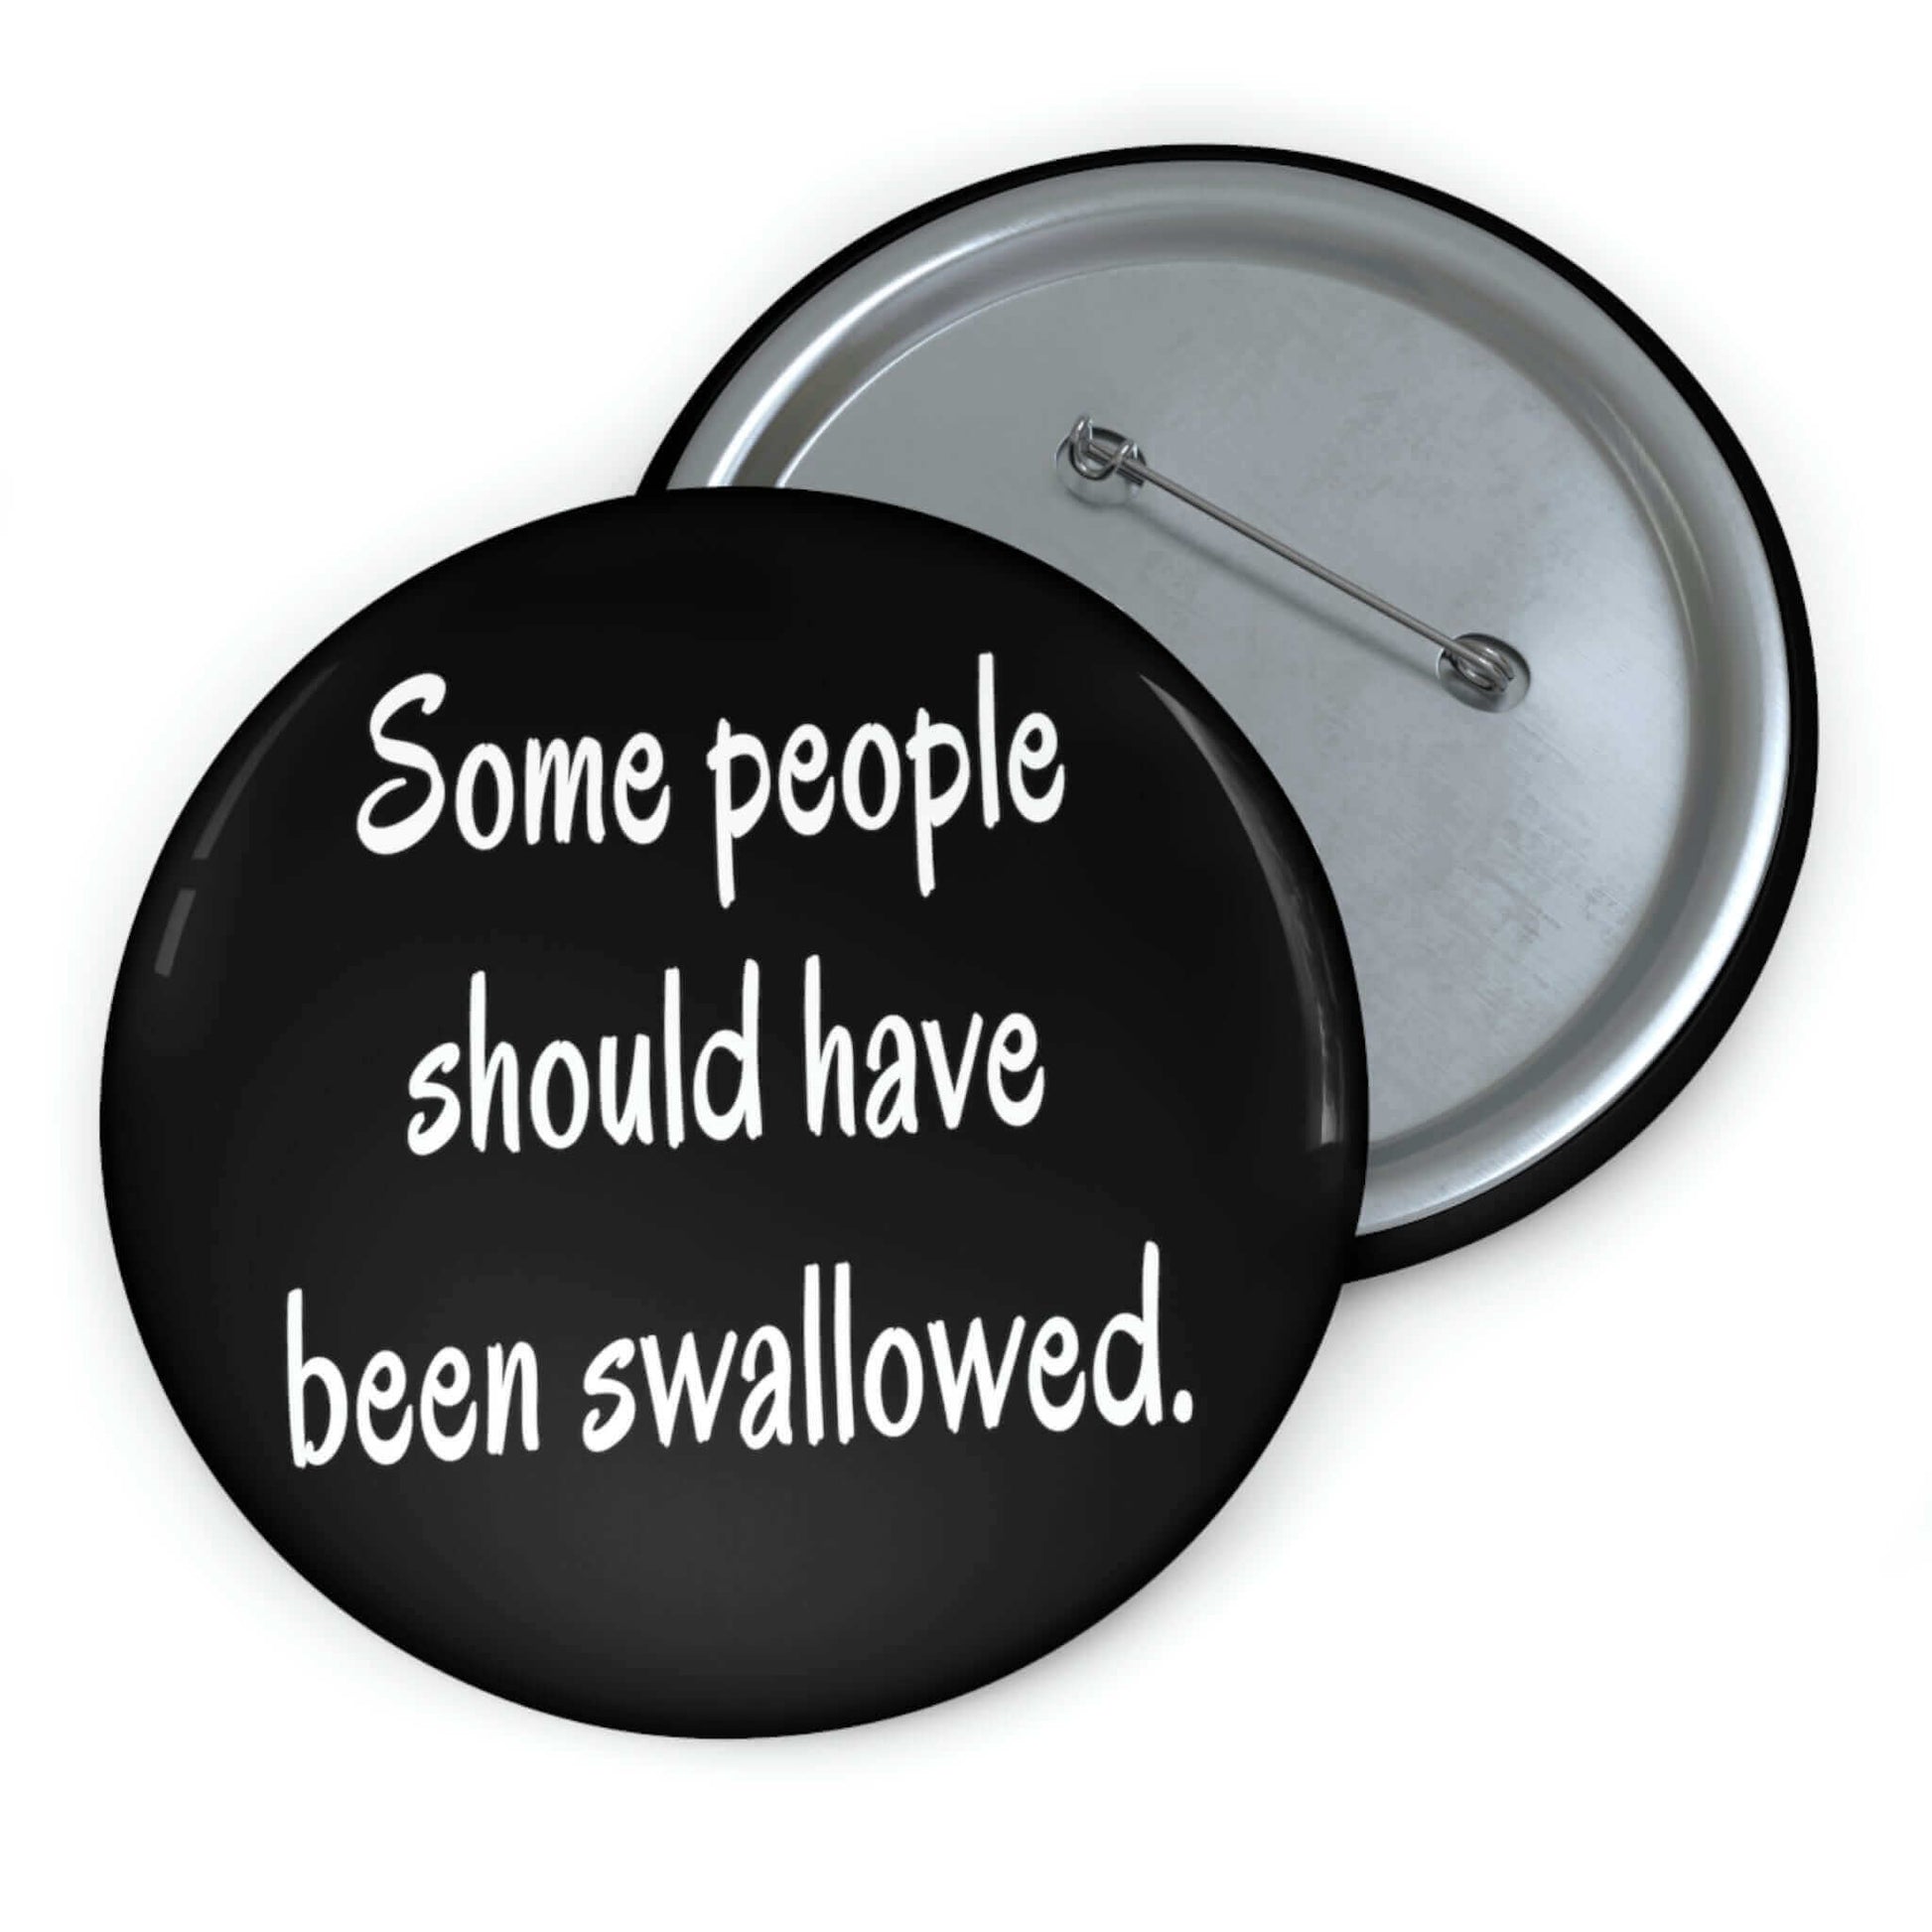 Pinback button that says some people should have been swallowed.